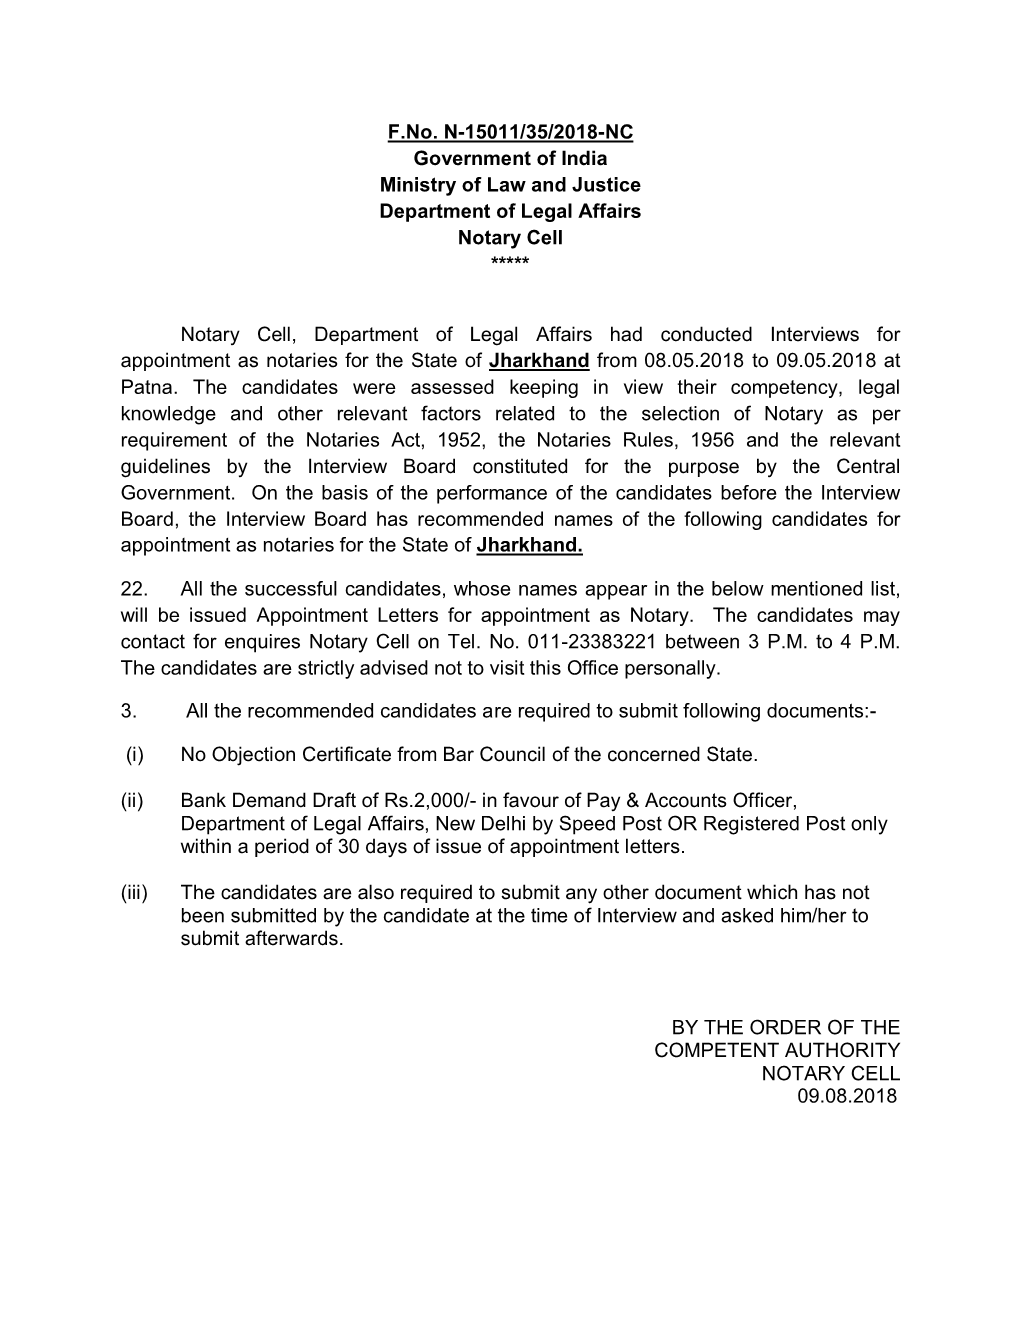 F.No. N-15011/35/2018-NC Government of India Ministry of Law and Justice Department of Legal Affairs Notary Cell *****